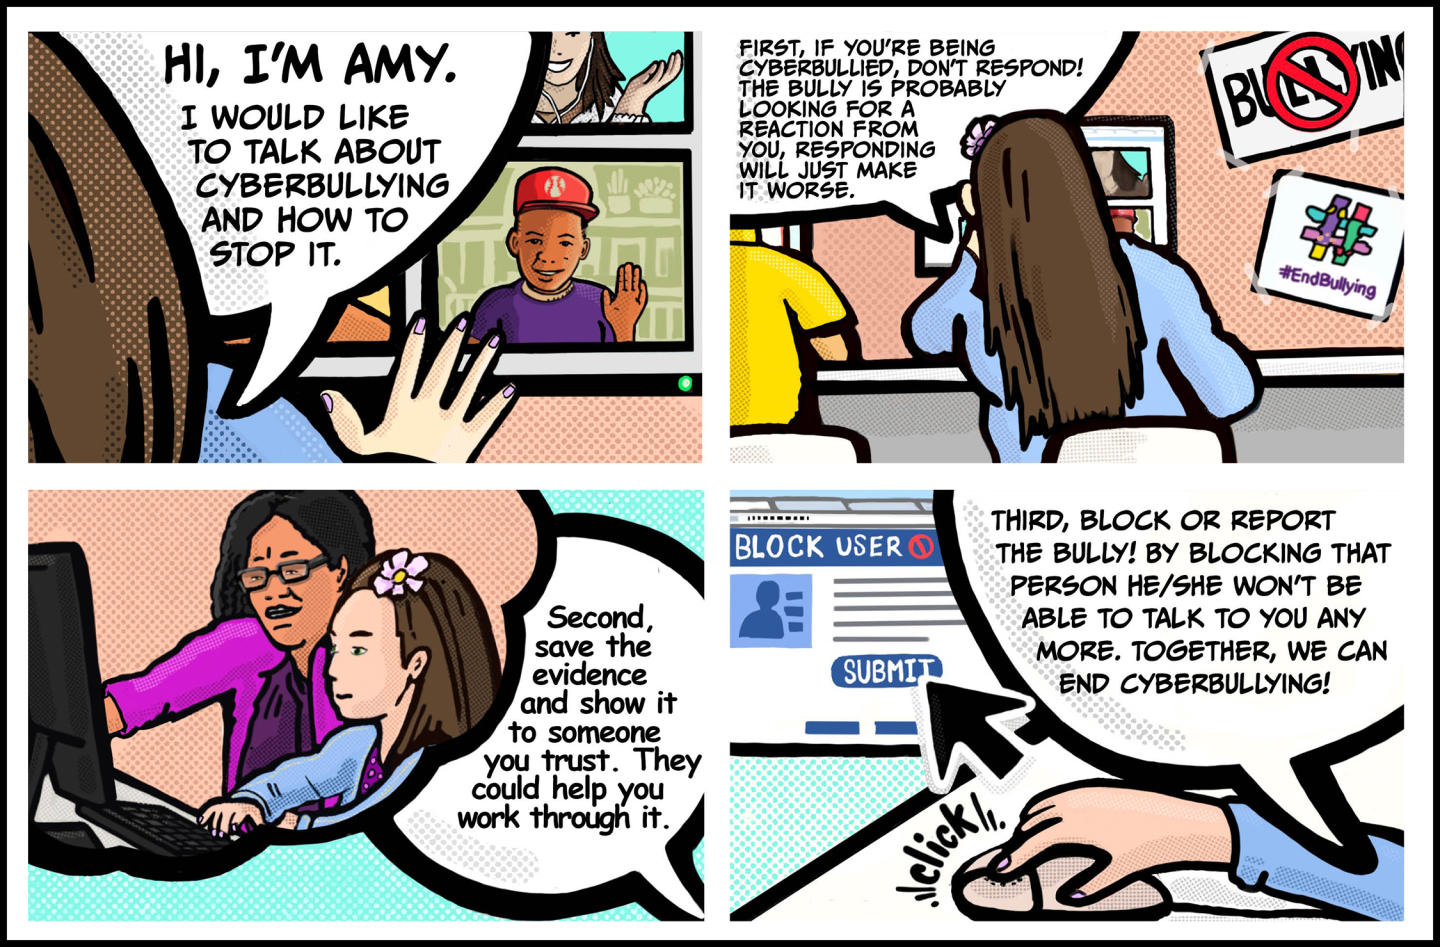 Let's end cyberbullying is an original comic created by Peyton S.